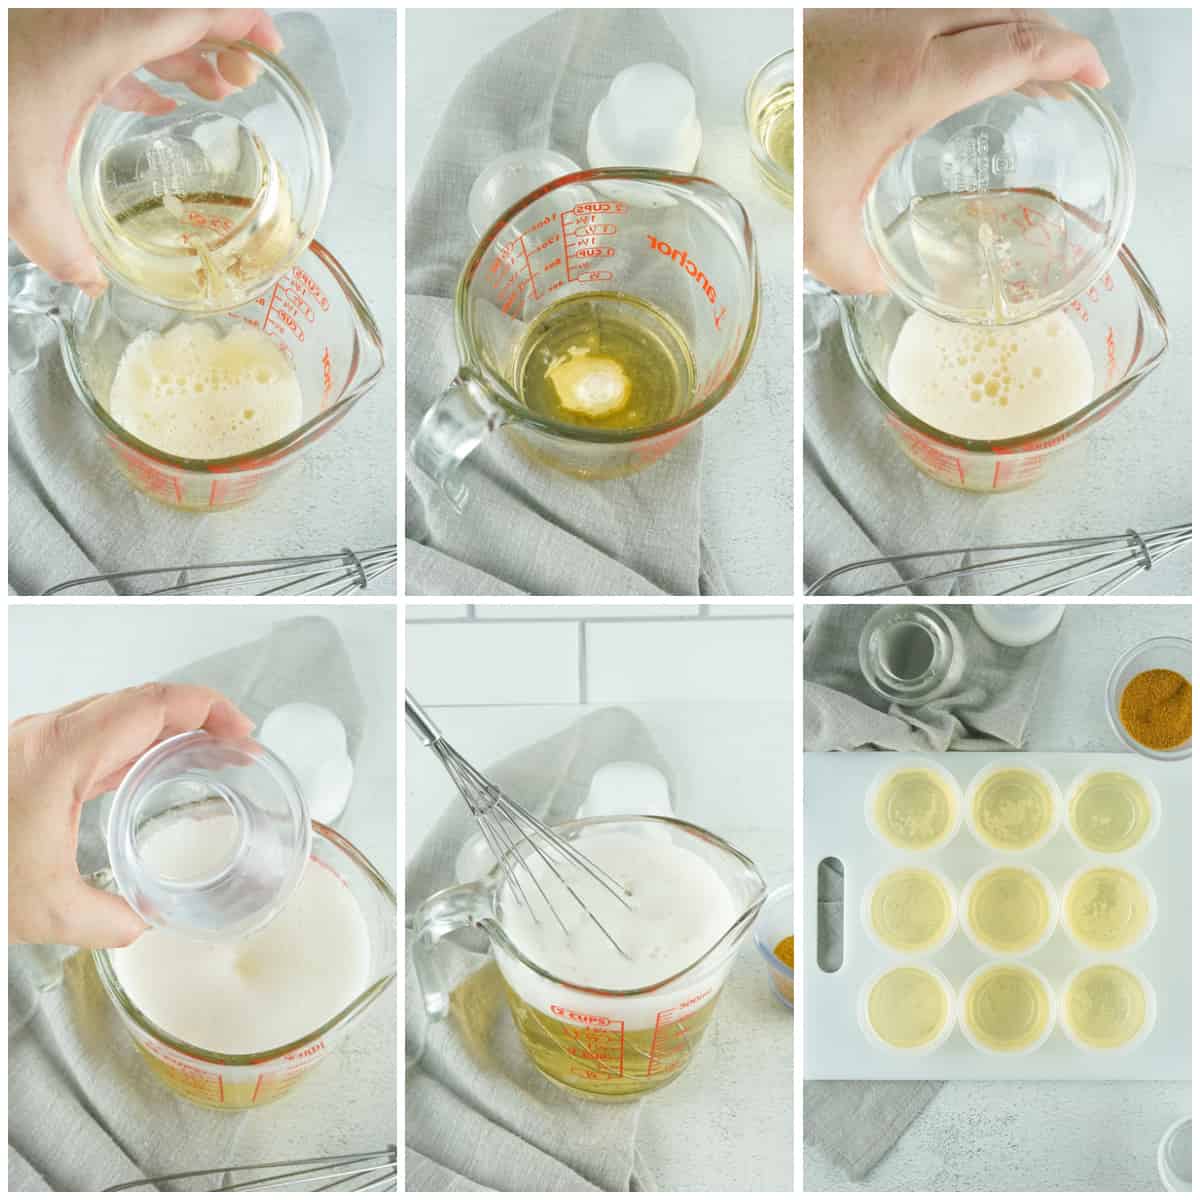 Step by step photos on how to make Champagne Jello Shots